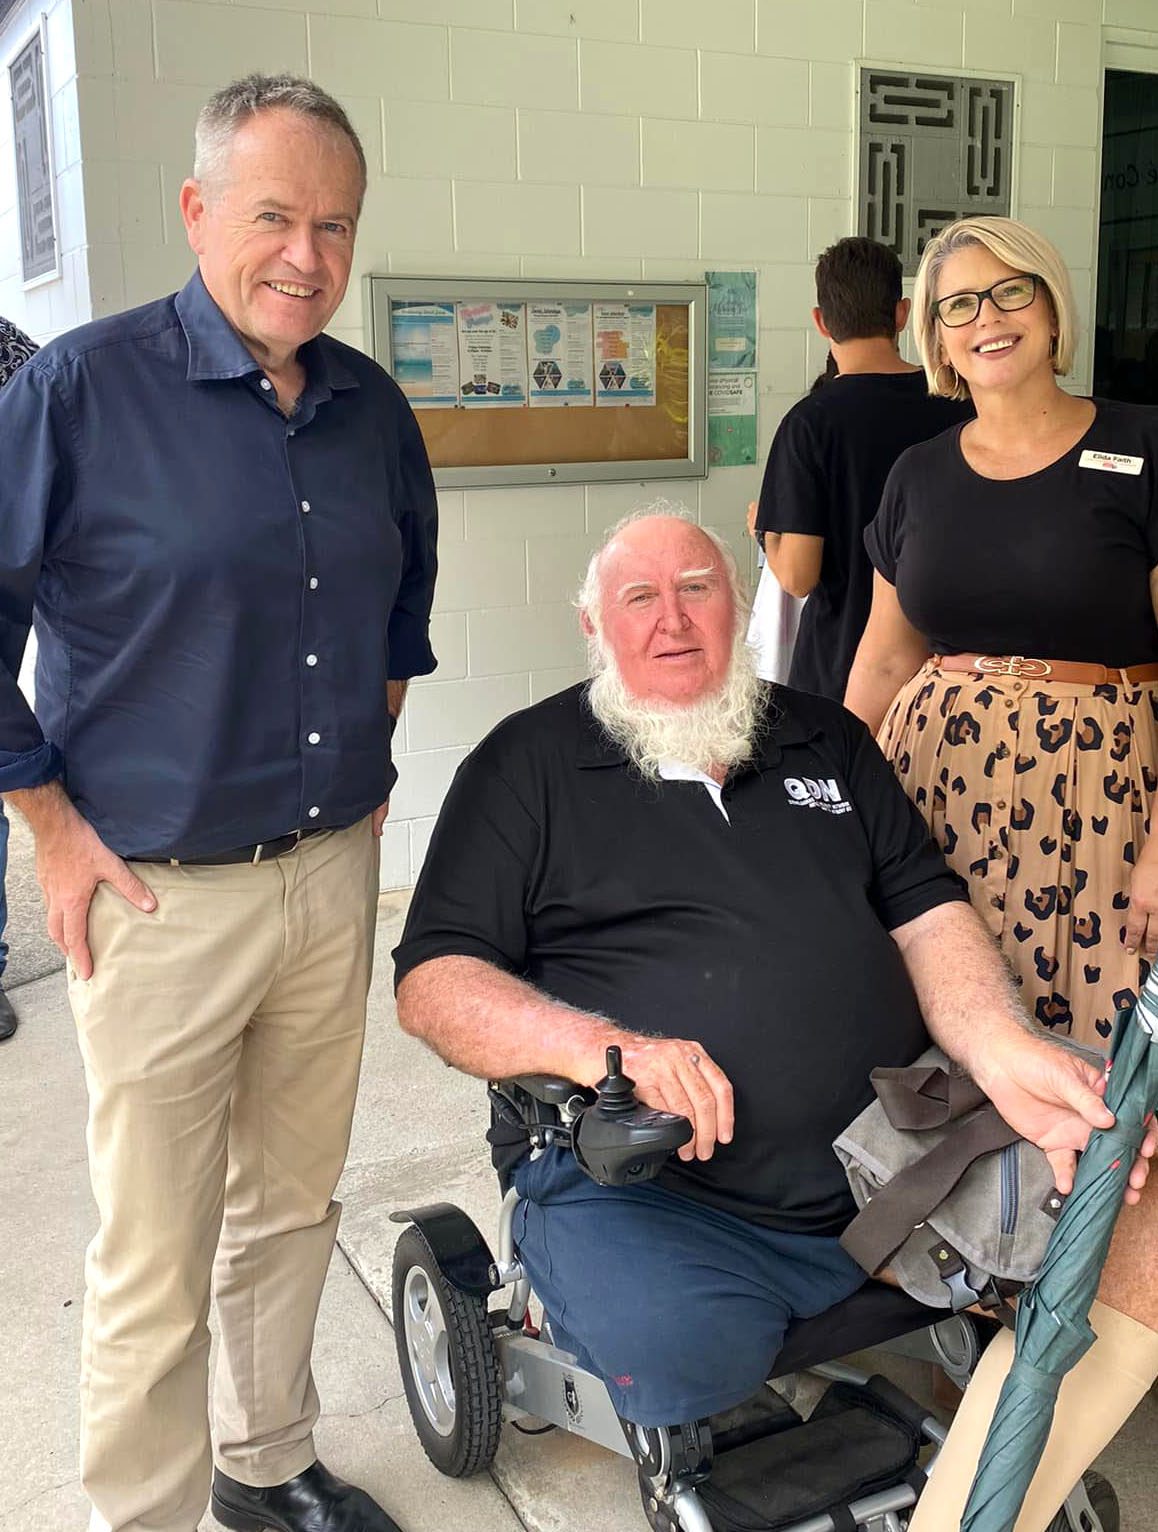 Three people smiling at the camera. One man standing wearing a blue long sleeved business shirt, next to him a man is sitting in a wheelchair wearing a QDN black polo, next to him is a woman standing wearing a black shirt and floral skirt. 